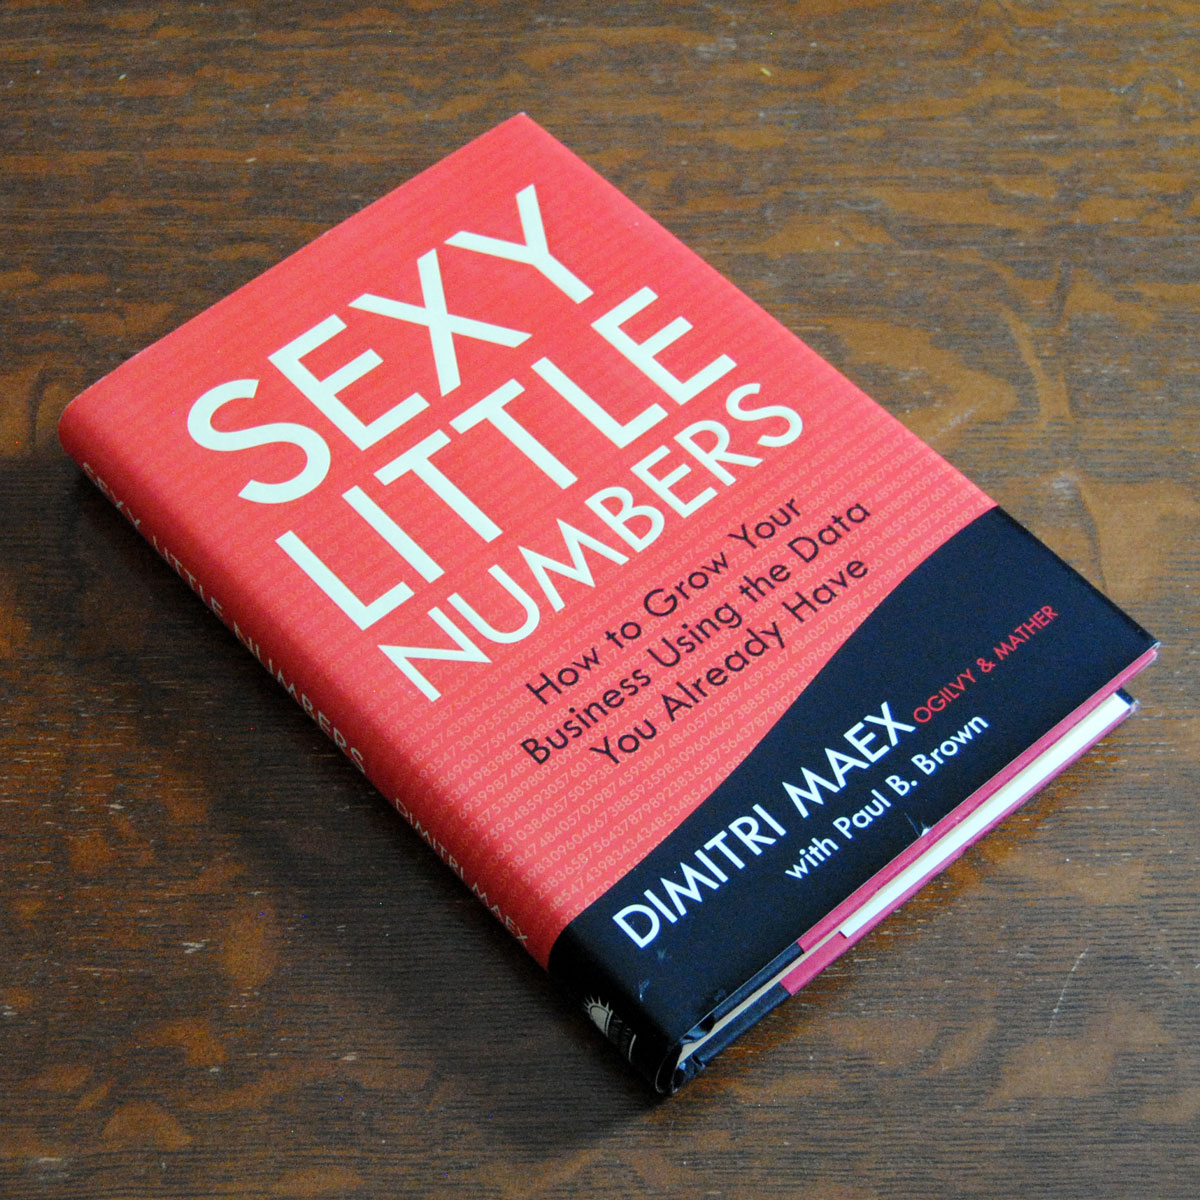 Sexy Little Numbers and the Curse of Dated Data Analysis